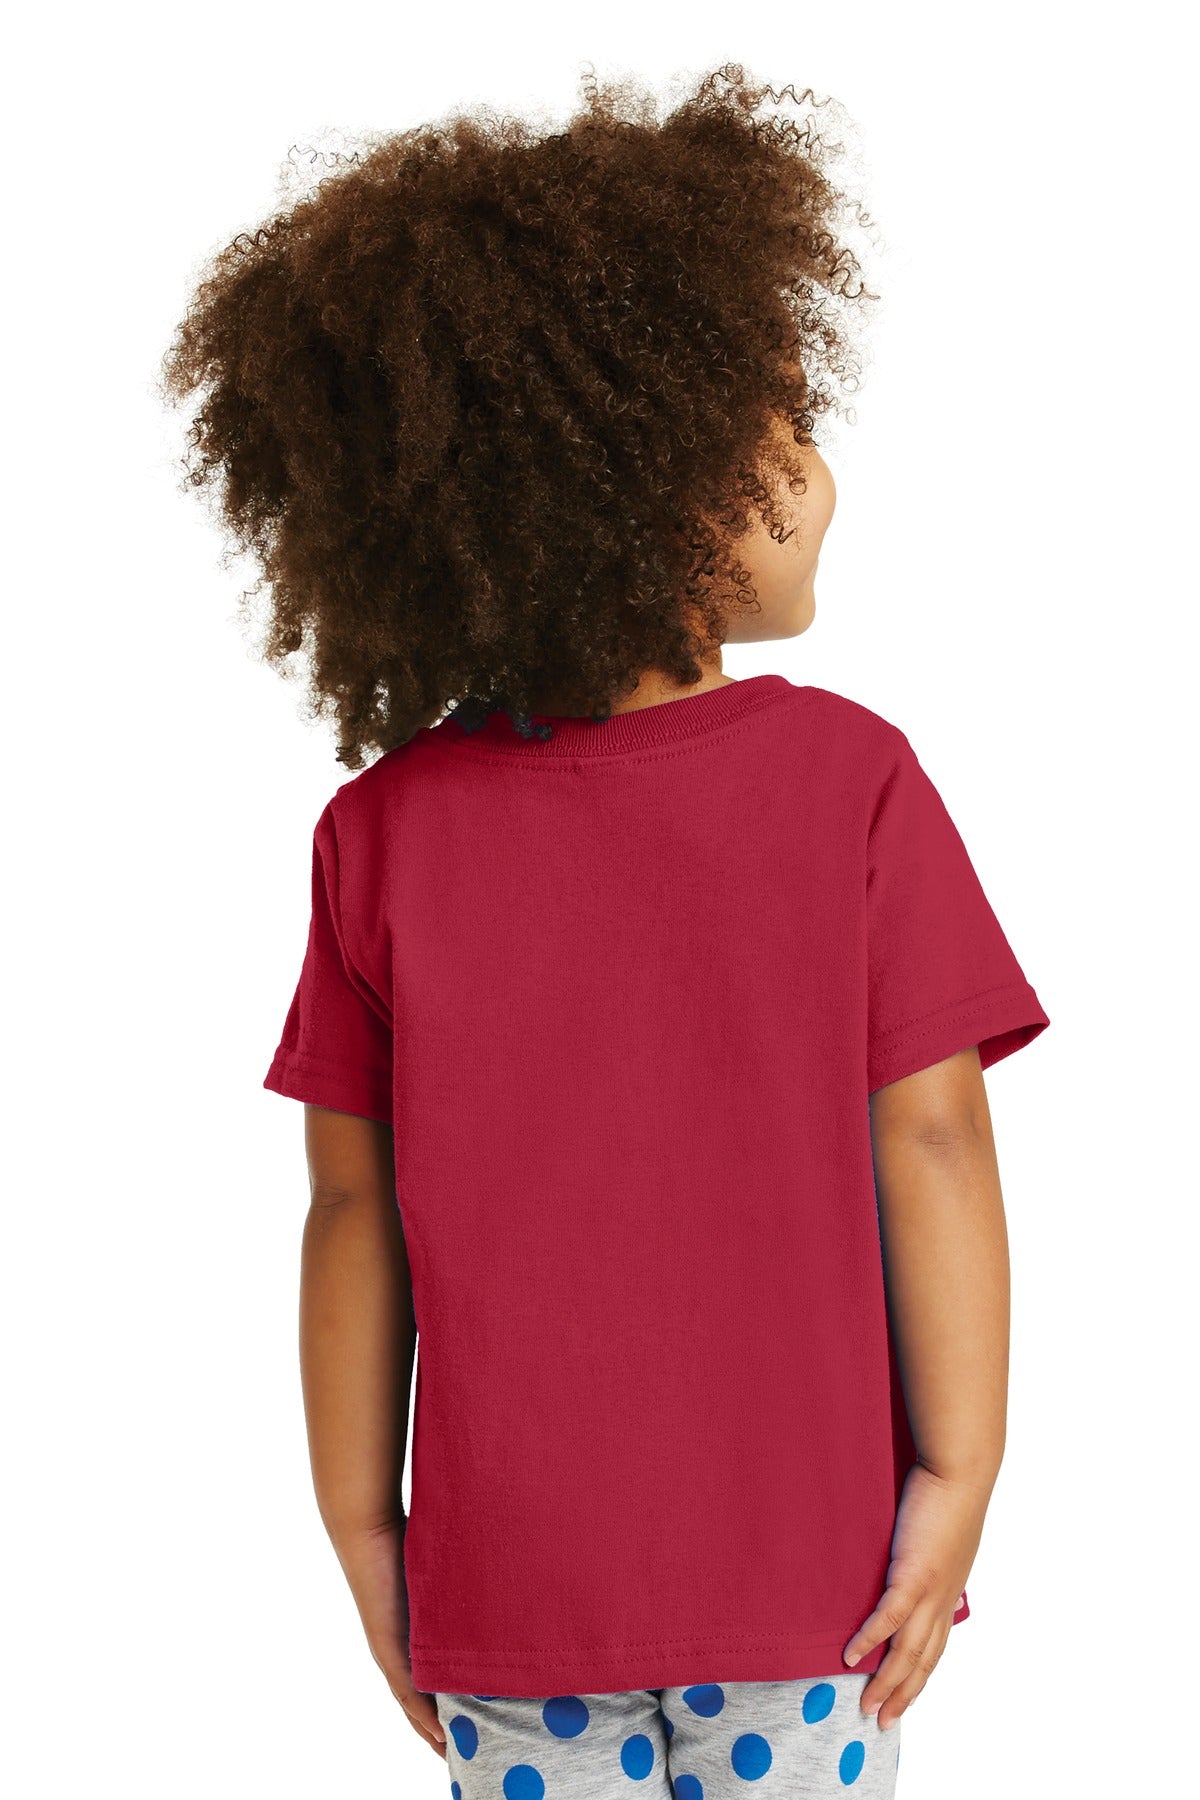 Port & Company Toddler Core Cotton Tee. CAR54T - Red